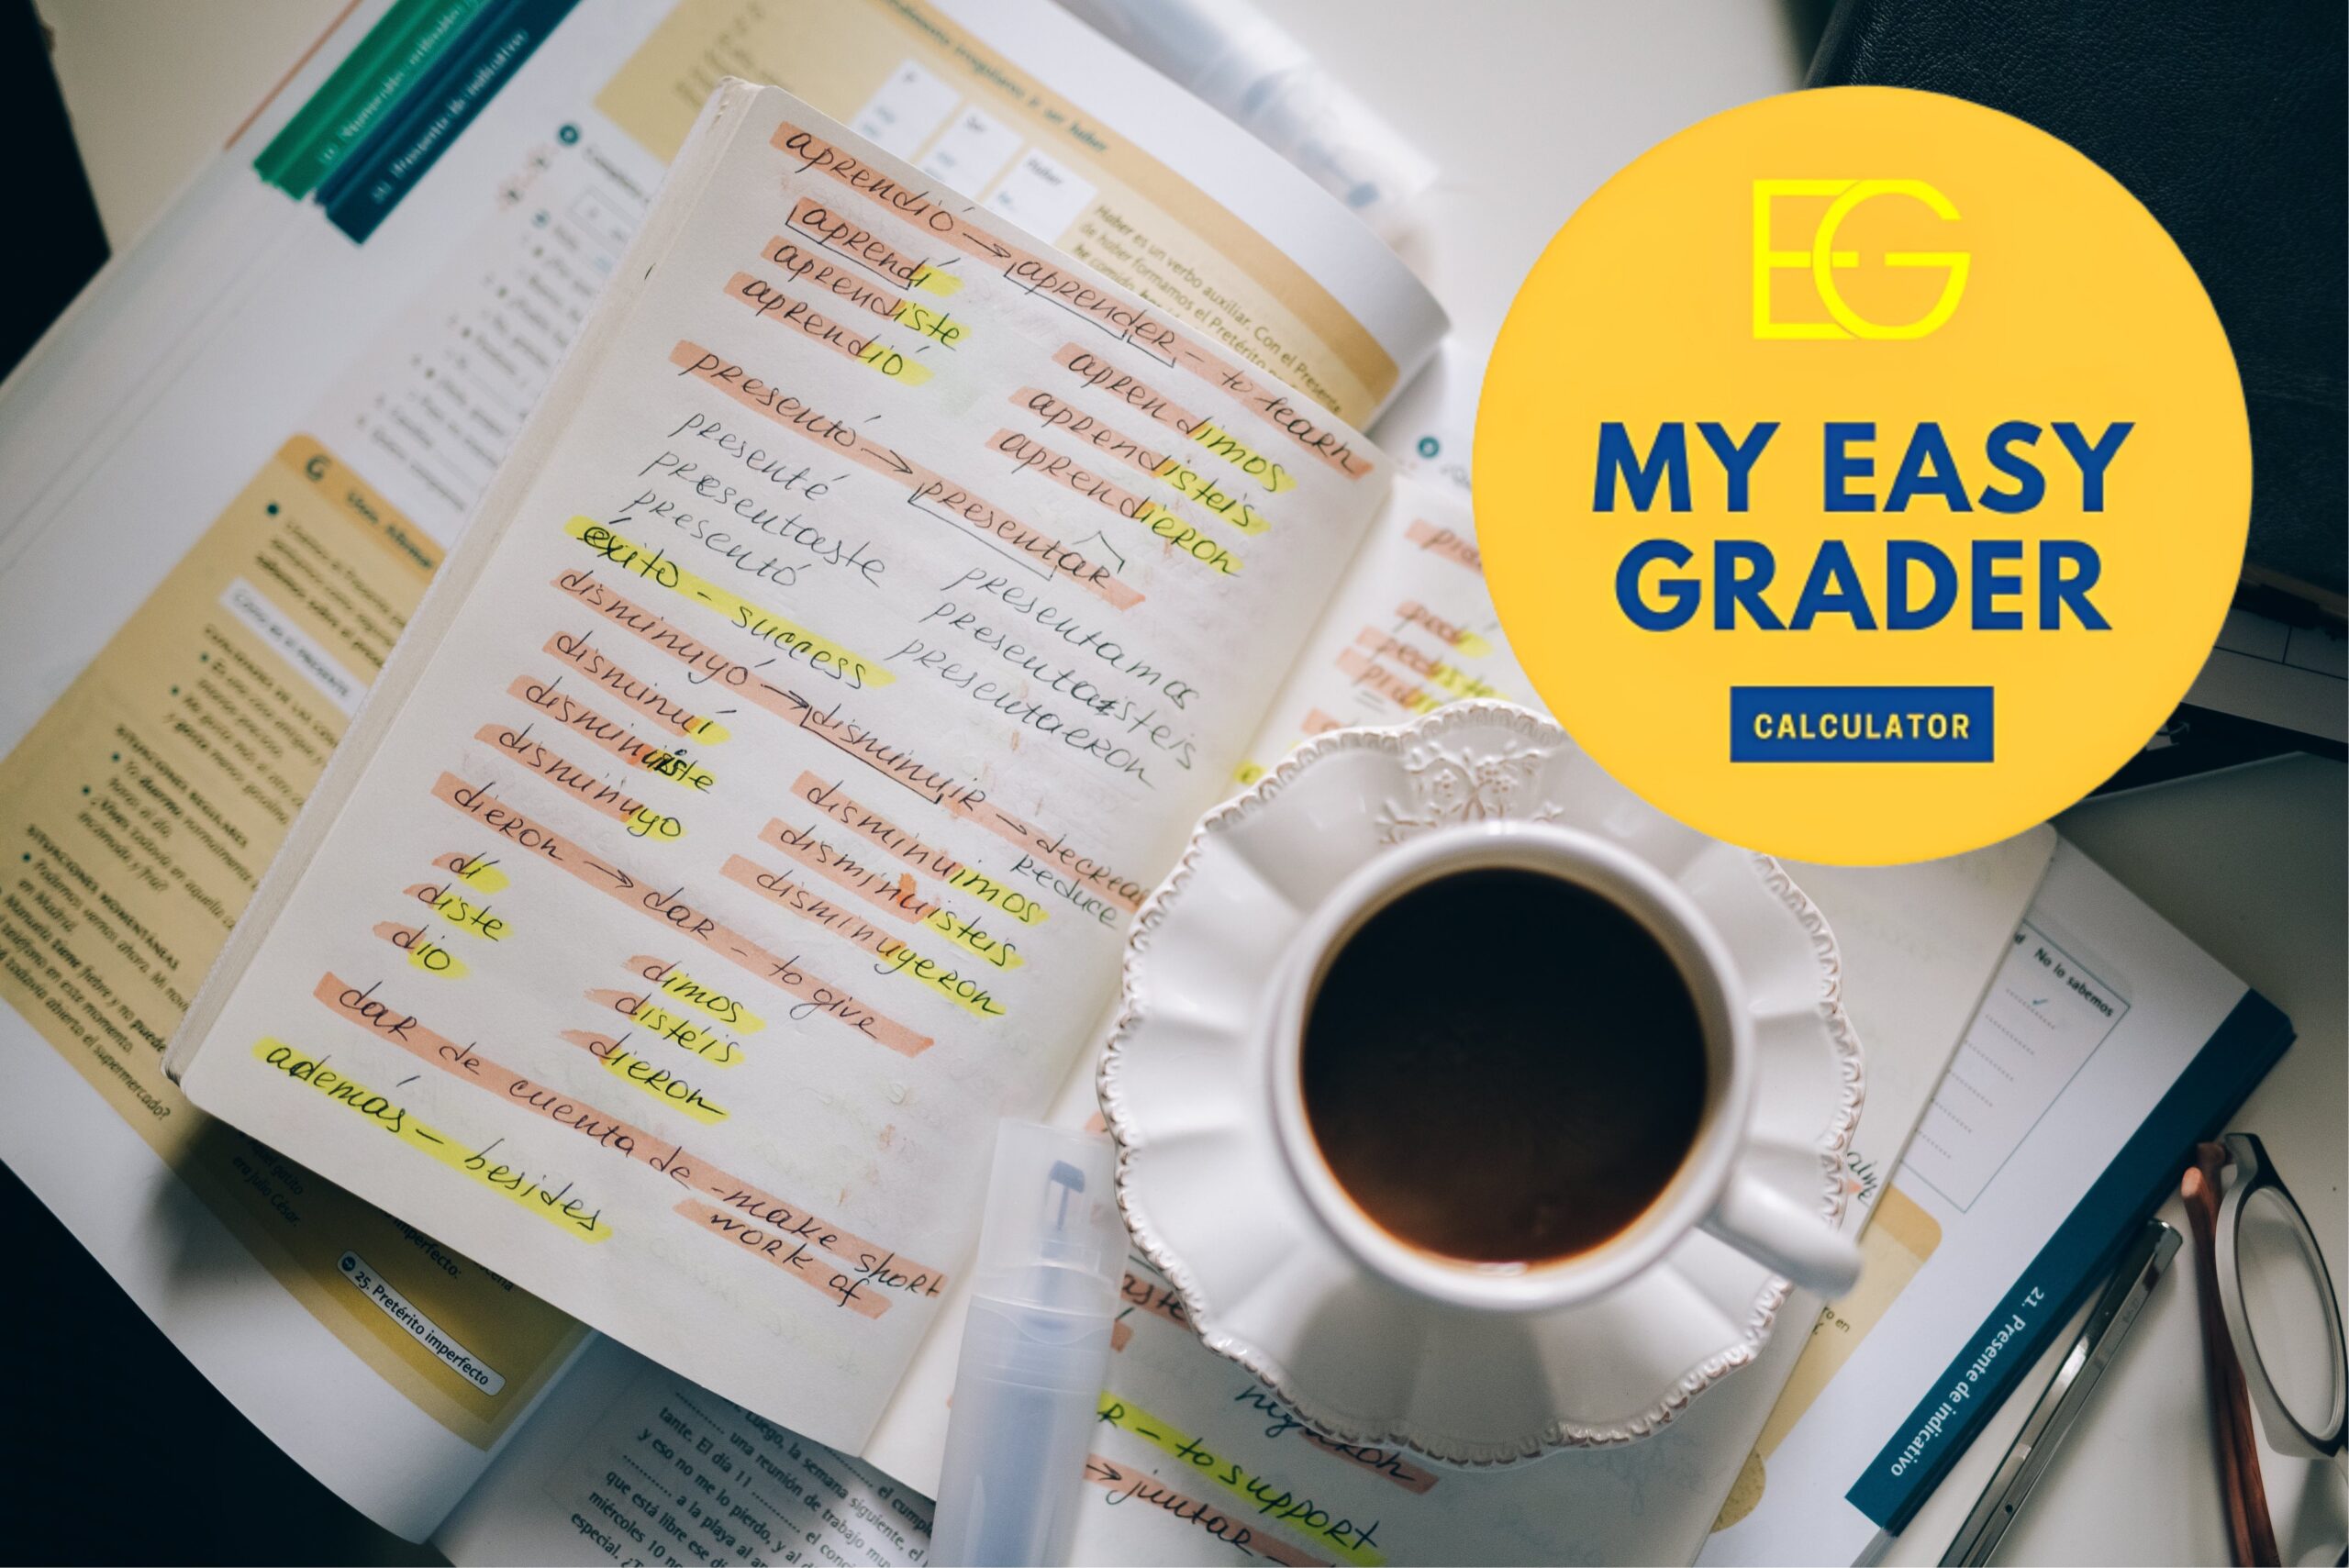 My Easy Grader Calculator for Foreign Languages – The Best Tool